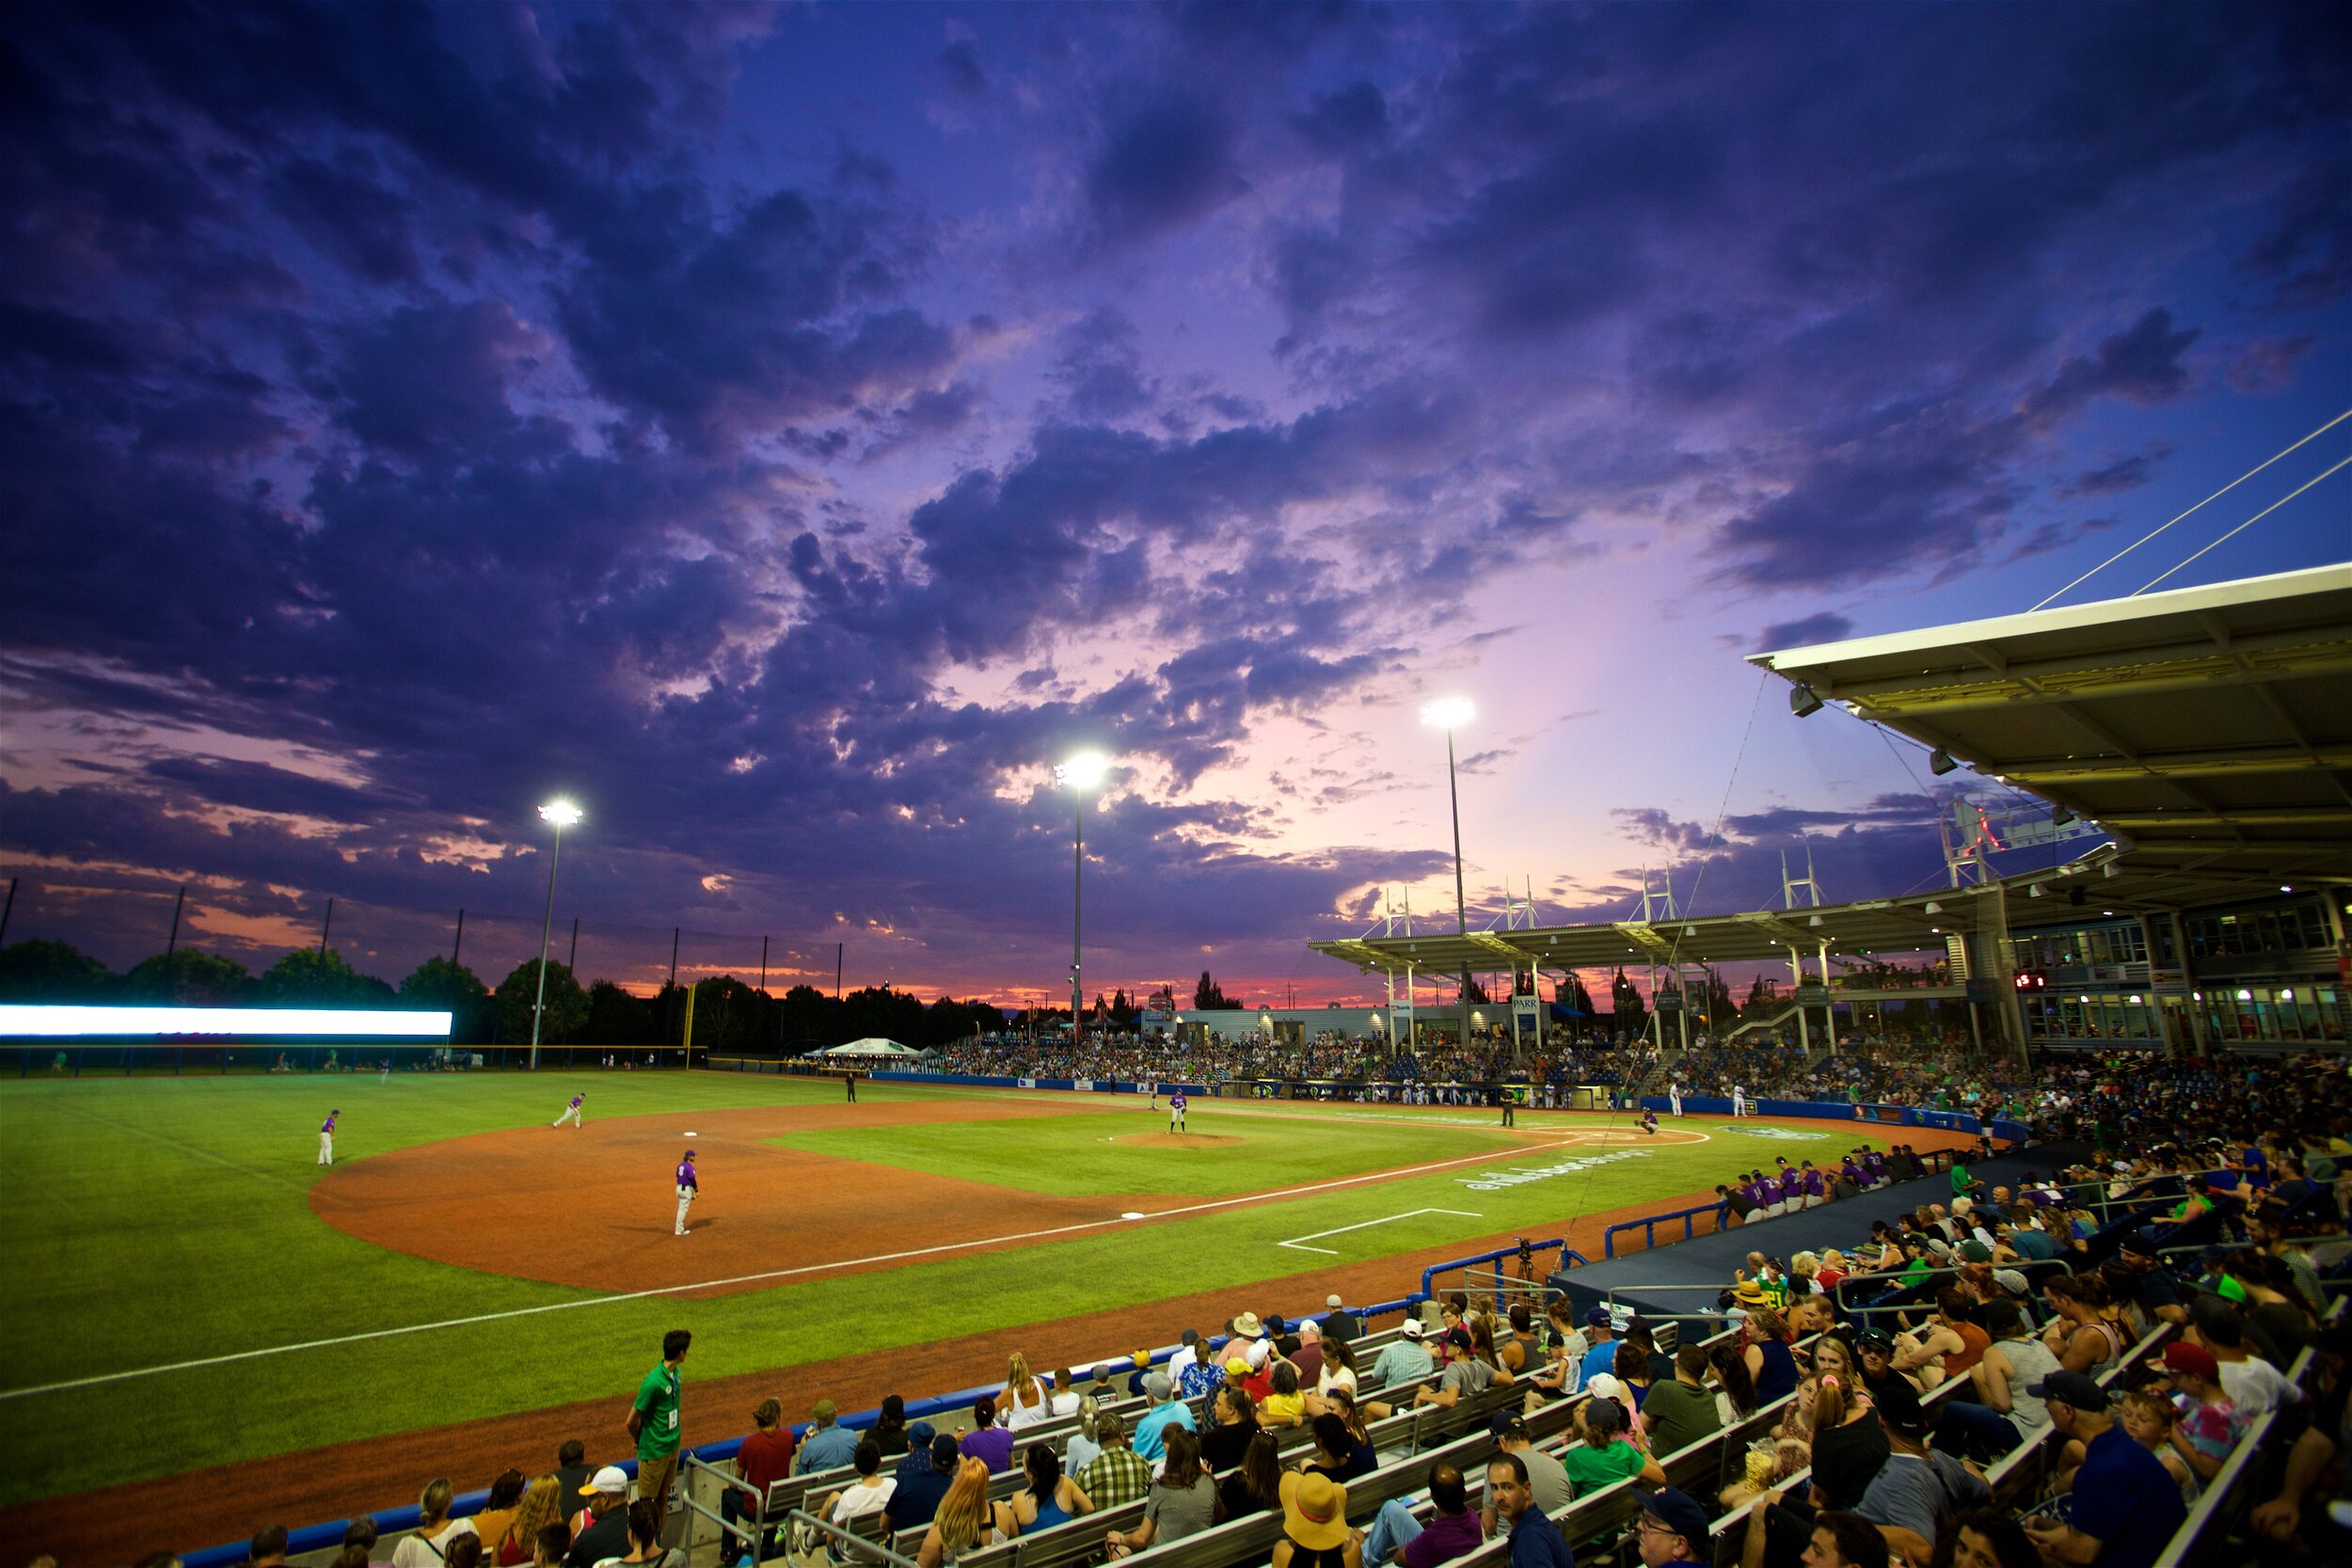 A Long Time Coming Hillsboro Hops Back In Action, Featuring A Host of Exciting Changes